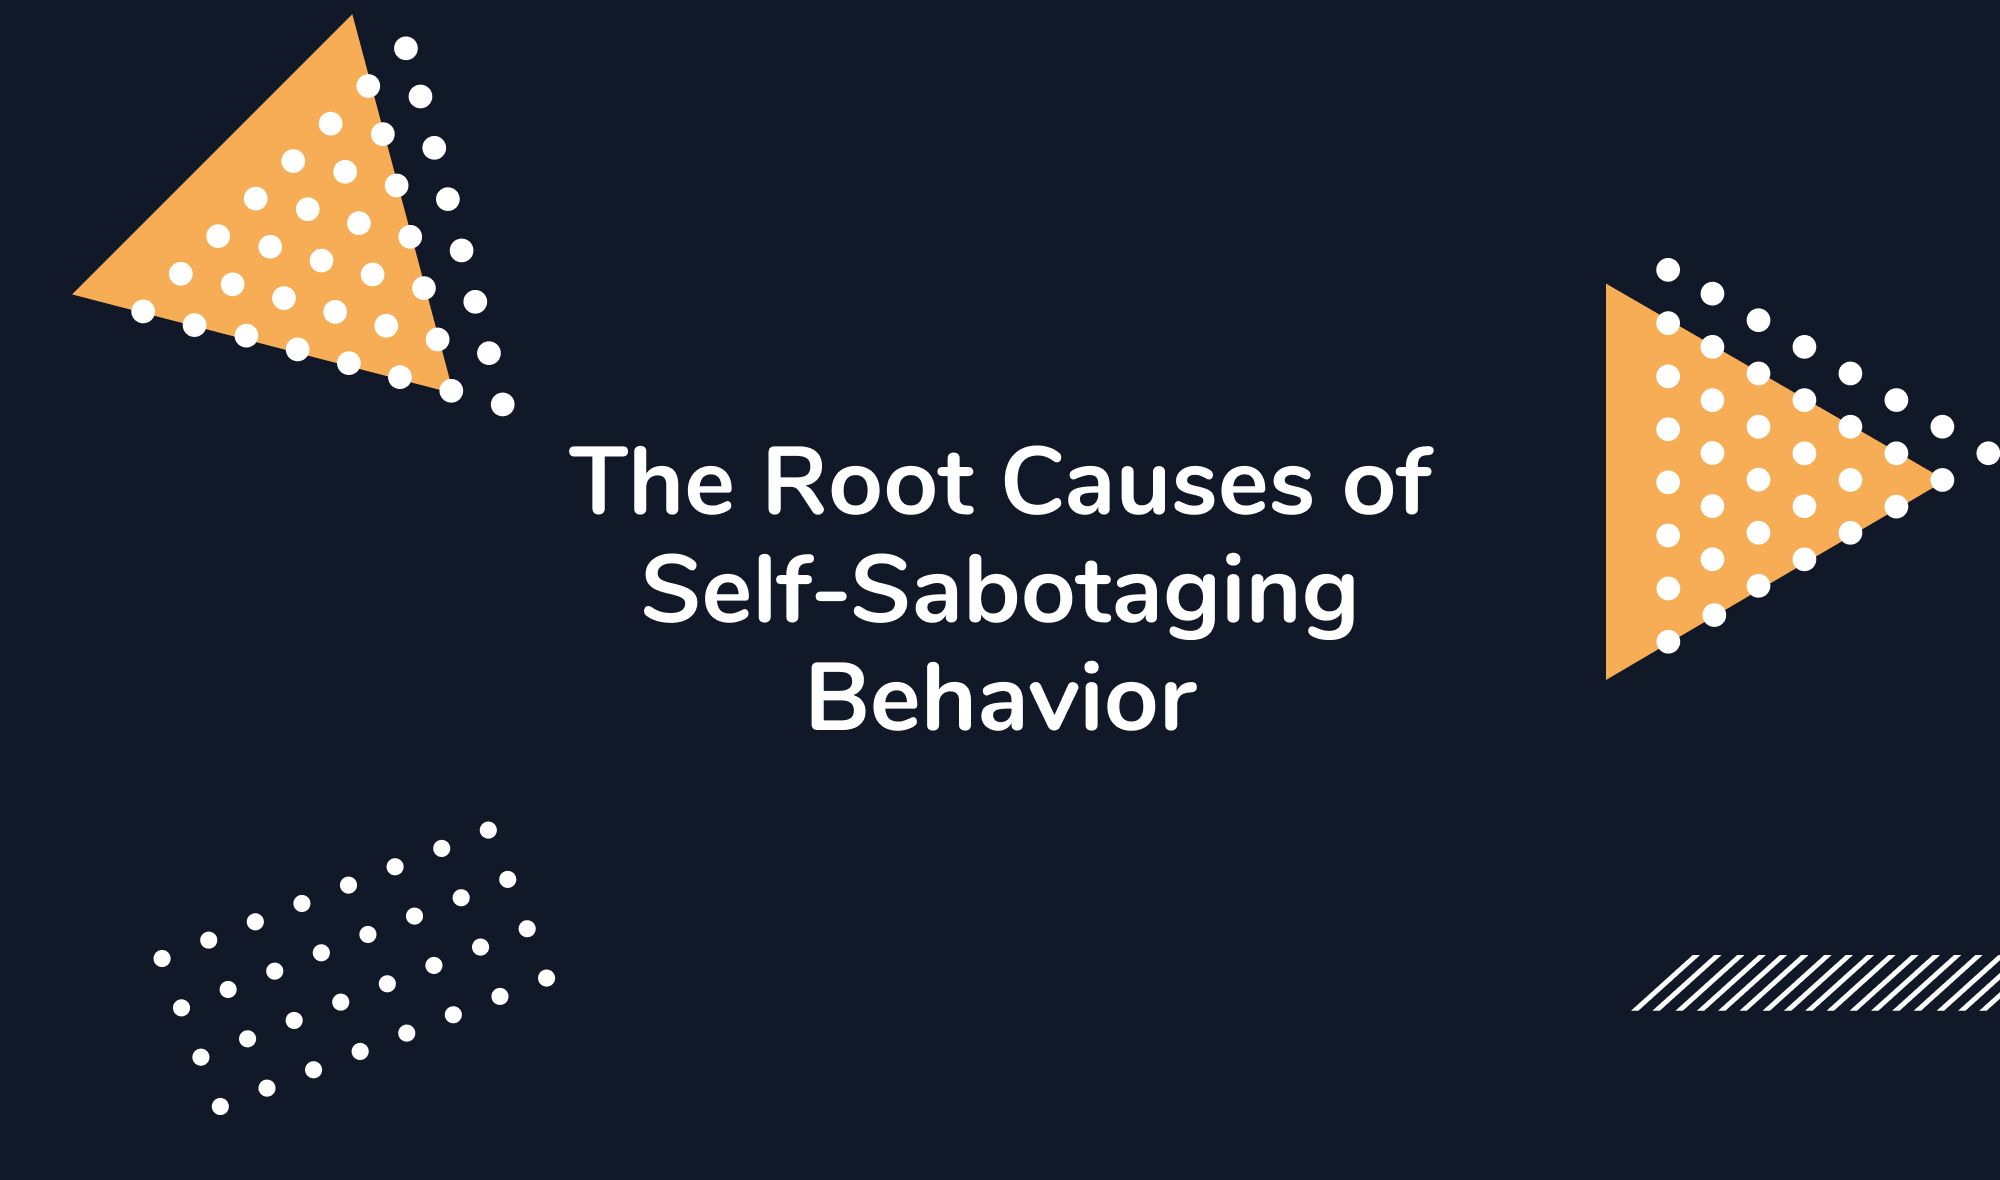 The Root Causes of Self-Sabotaging Behavior